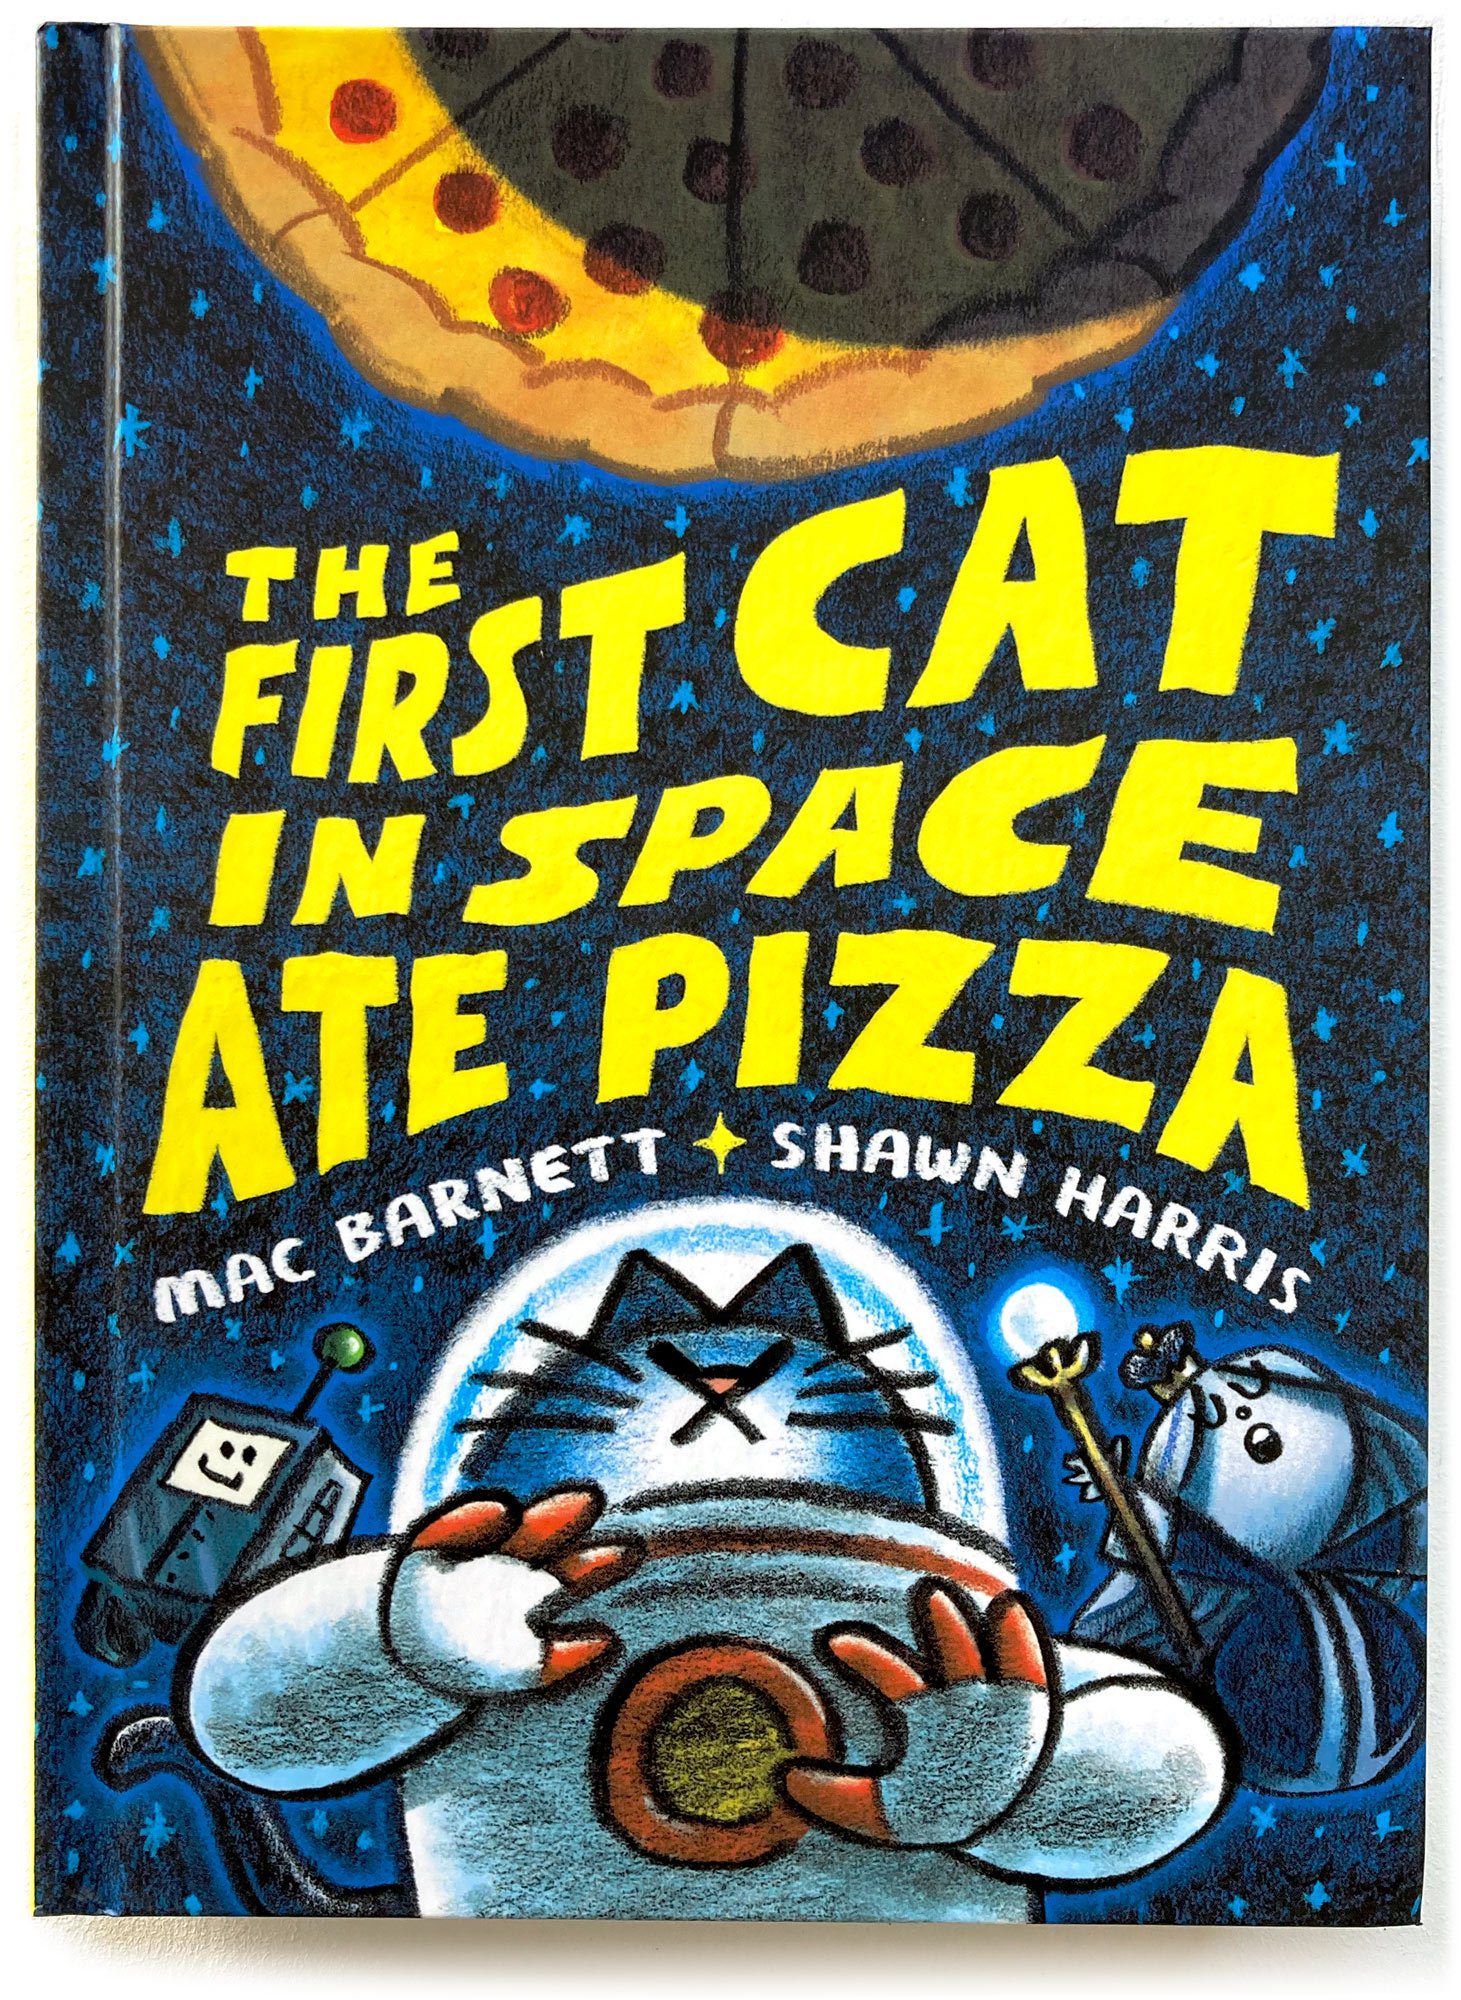 The First Cat In Space Ate Pizza book cover